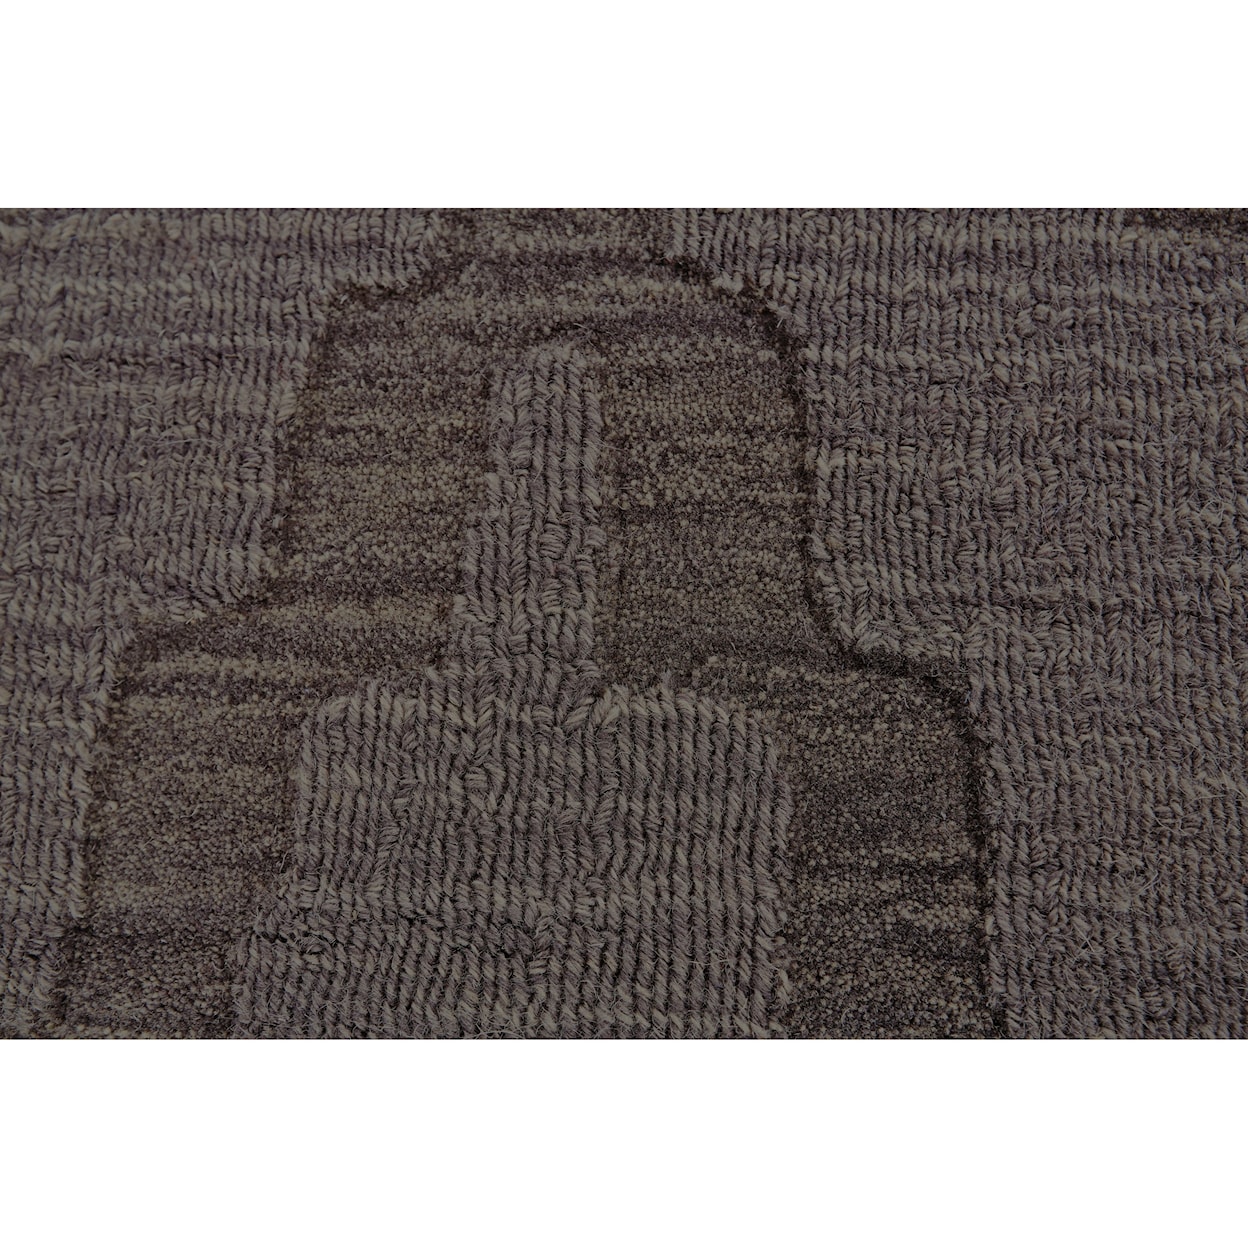 Feizy Rugs Soma Charcoal 2'-6" x 8' Runner Rug